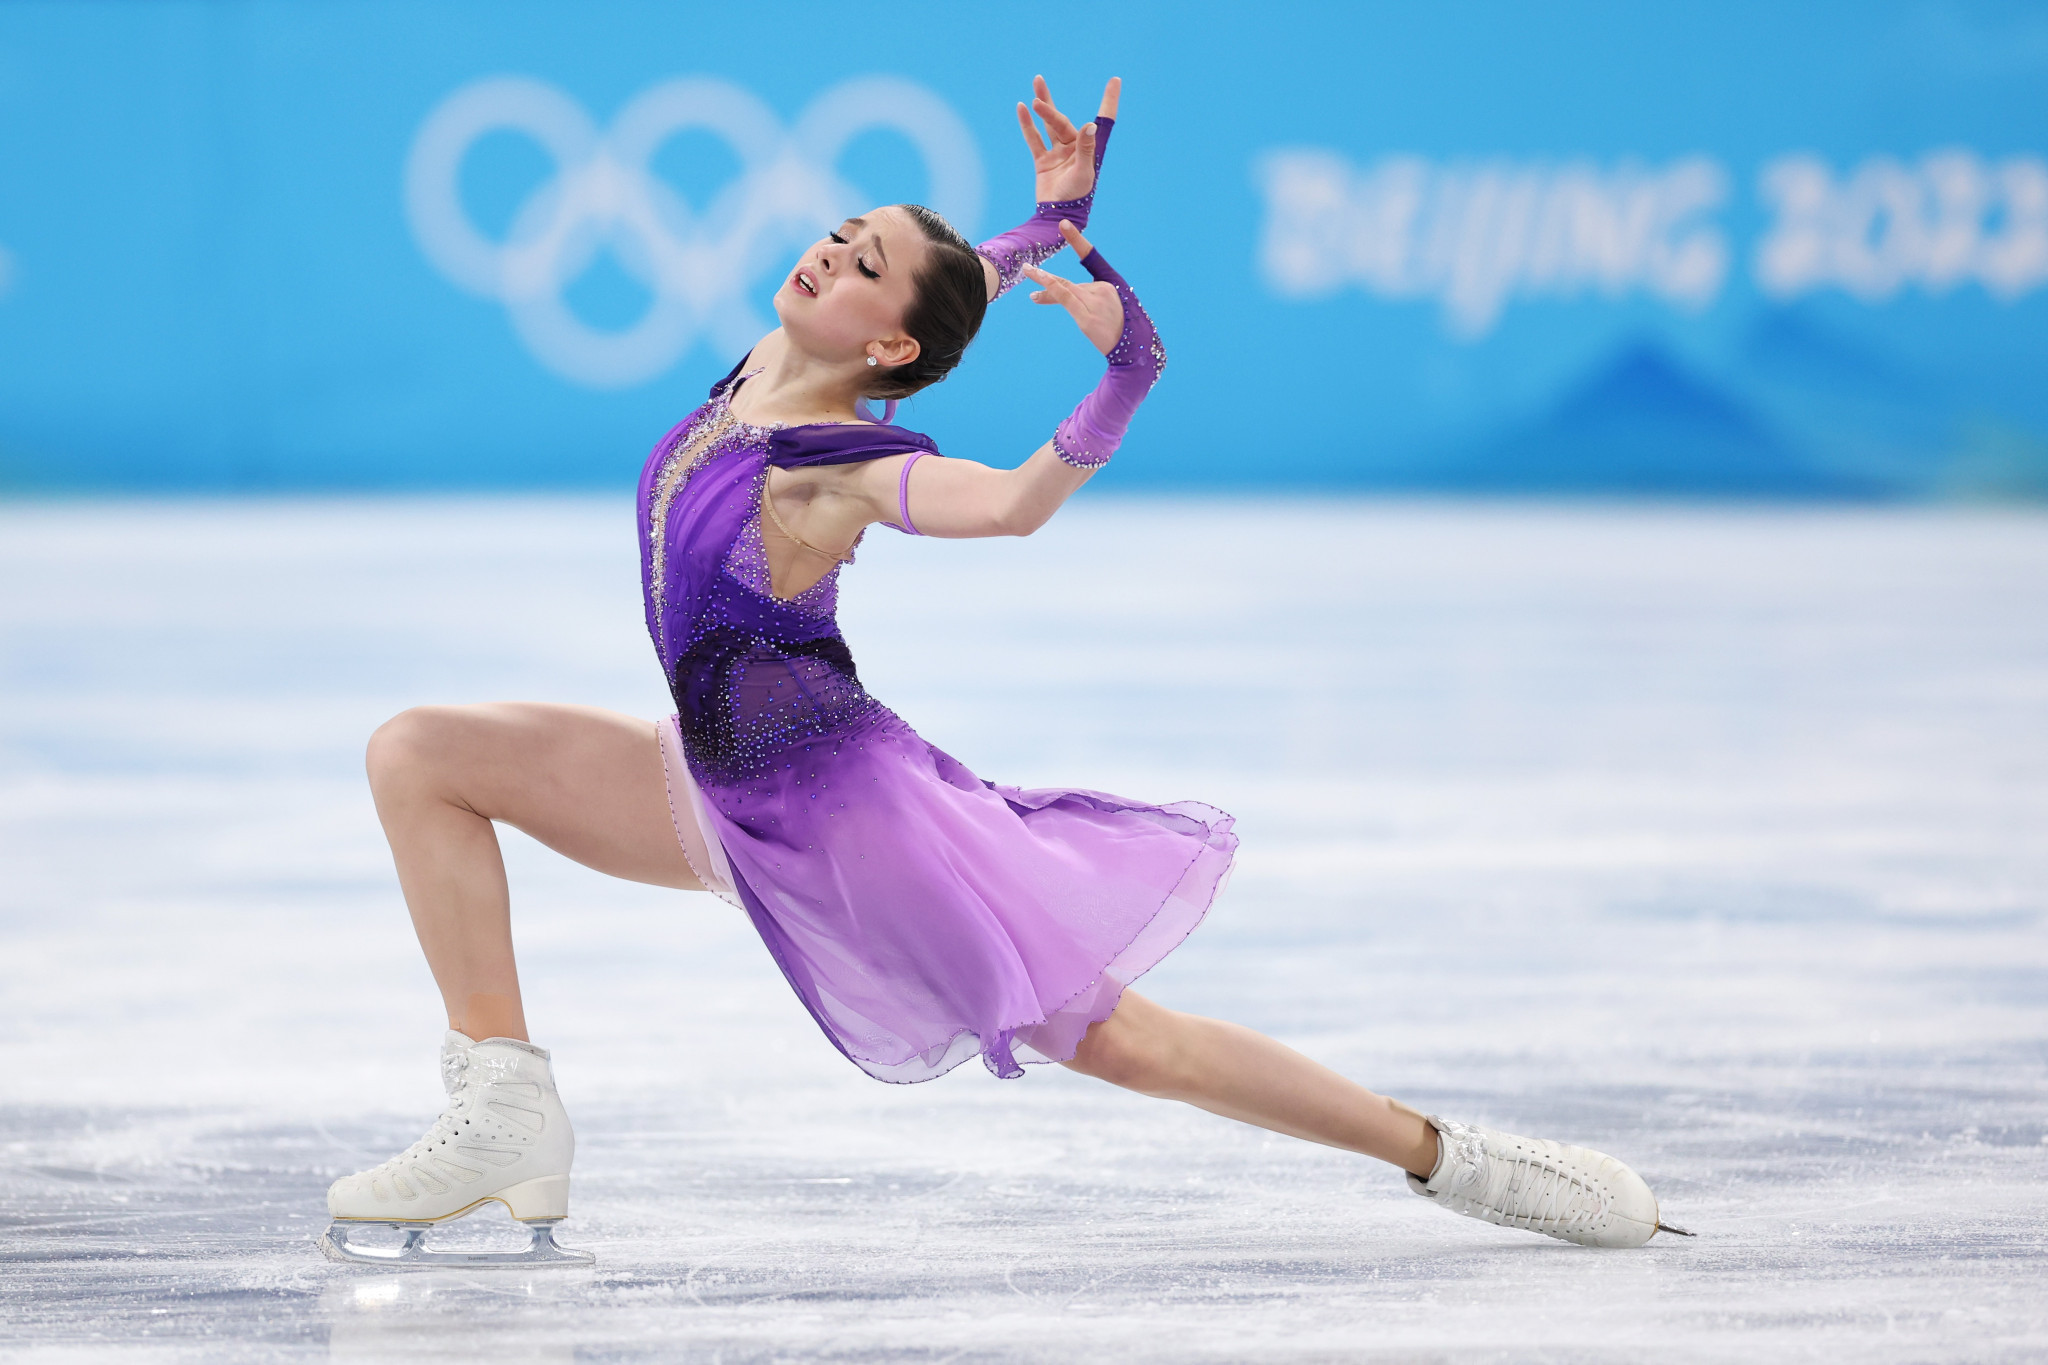 Kamila Valieva helped the ROC to win figure skating team gold at Beijing 2022 ahead of the US team containing Evan Bates ©Getty Images